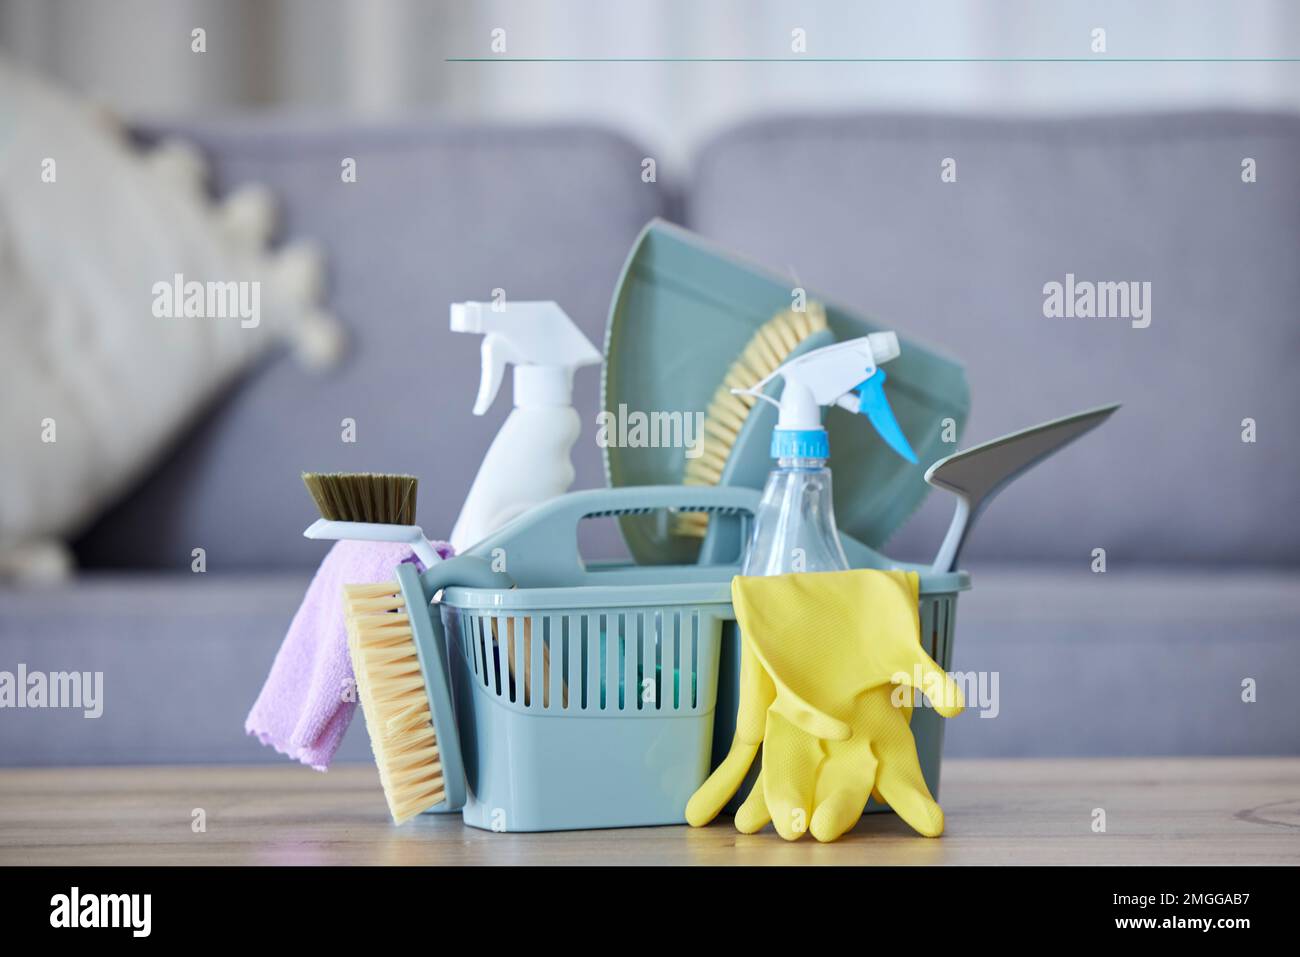 Cleaner basket, product and cloth with brush, gloves and spray bottle for health, safety and stop bacteria in home. Spring cleaning tools, chemical Stock Photo